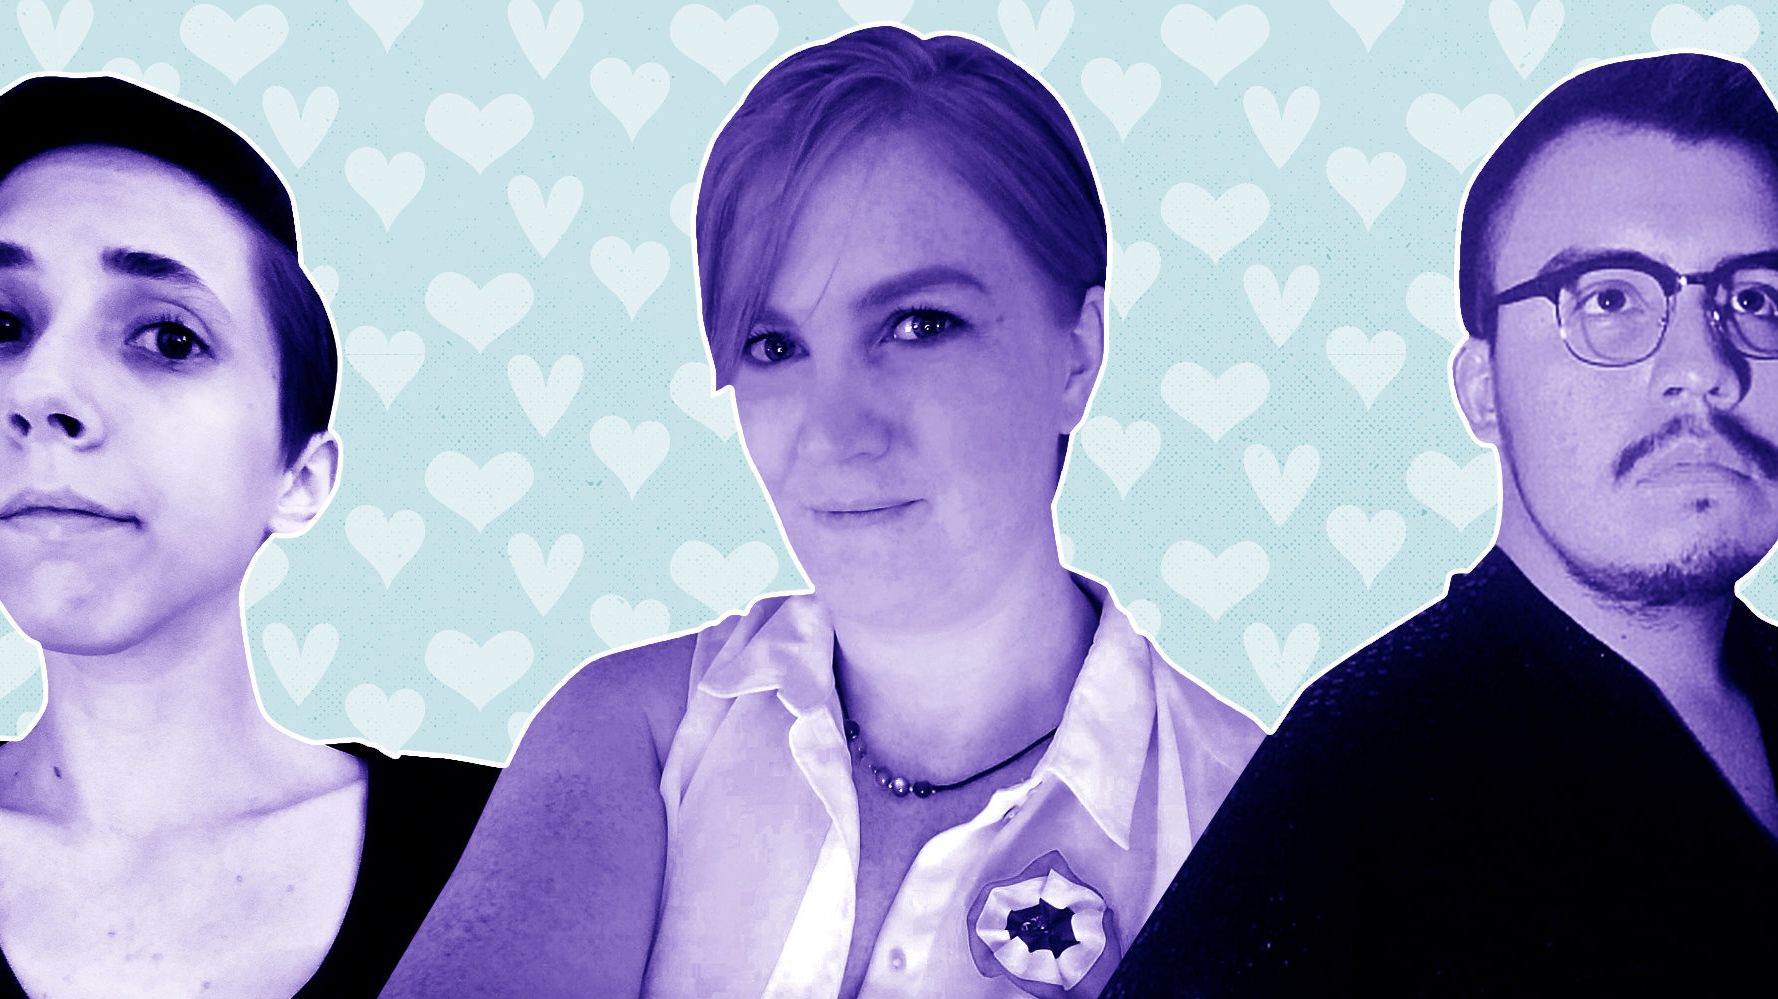 Online dating isn’t easy — especially when you’re asexual